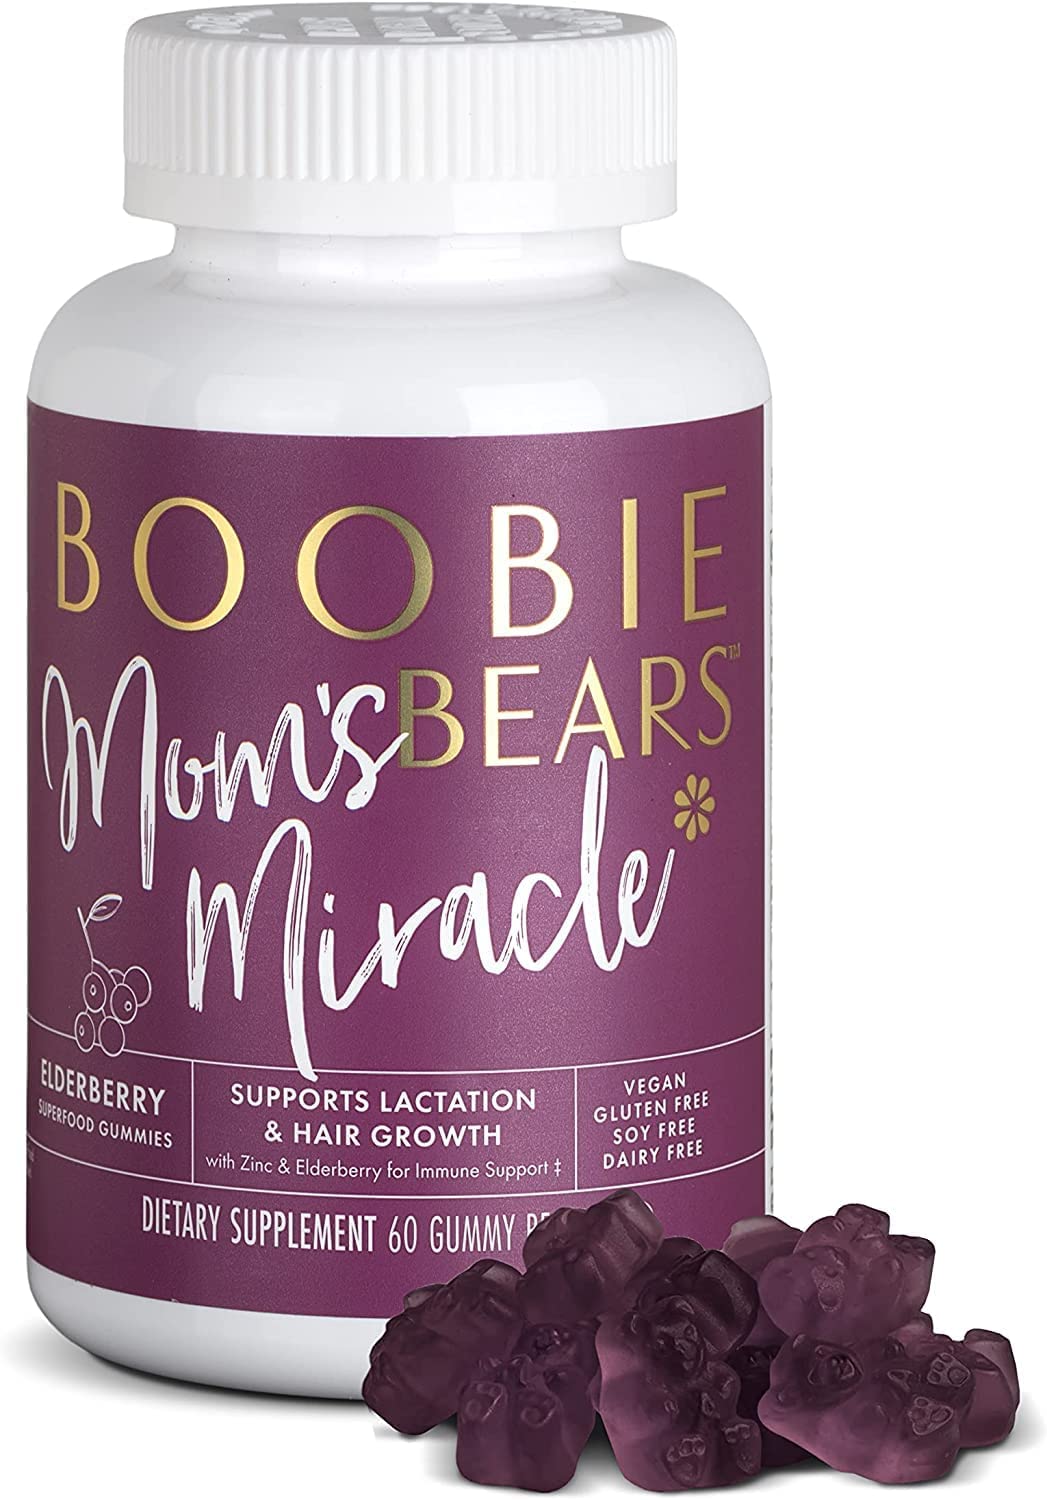 Boobie Bears Lactation Gummies, Lactation Supplement for Increased Breast Milk, Immunity Support, Postpartum Hair Loss, Superfood Breastfeeding Supplements with Moringa and Elderberry (60 Gummies)